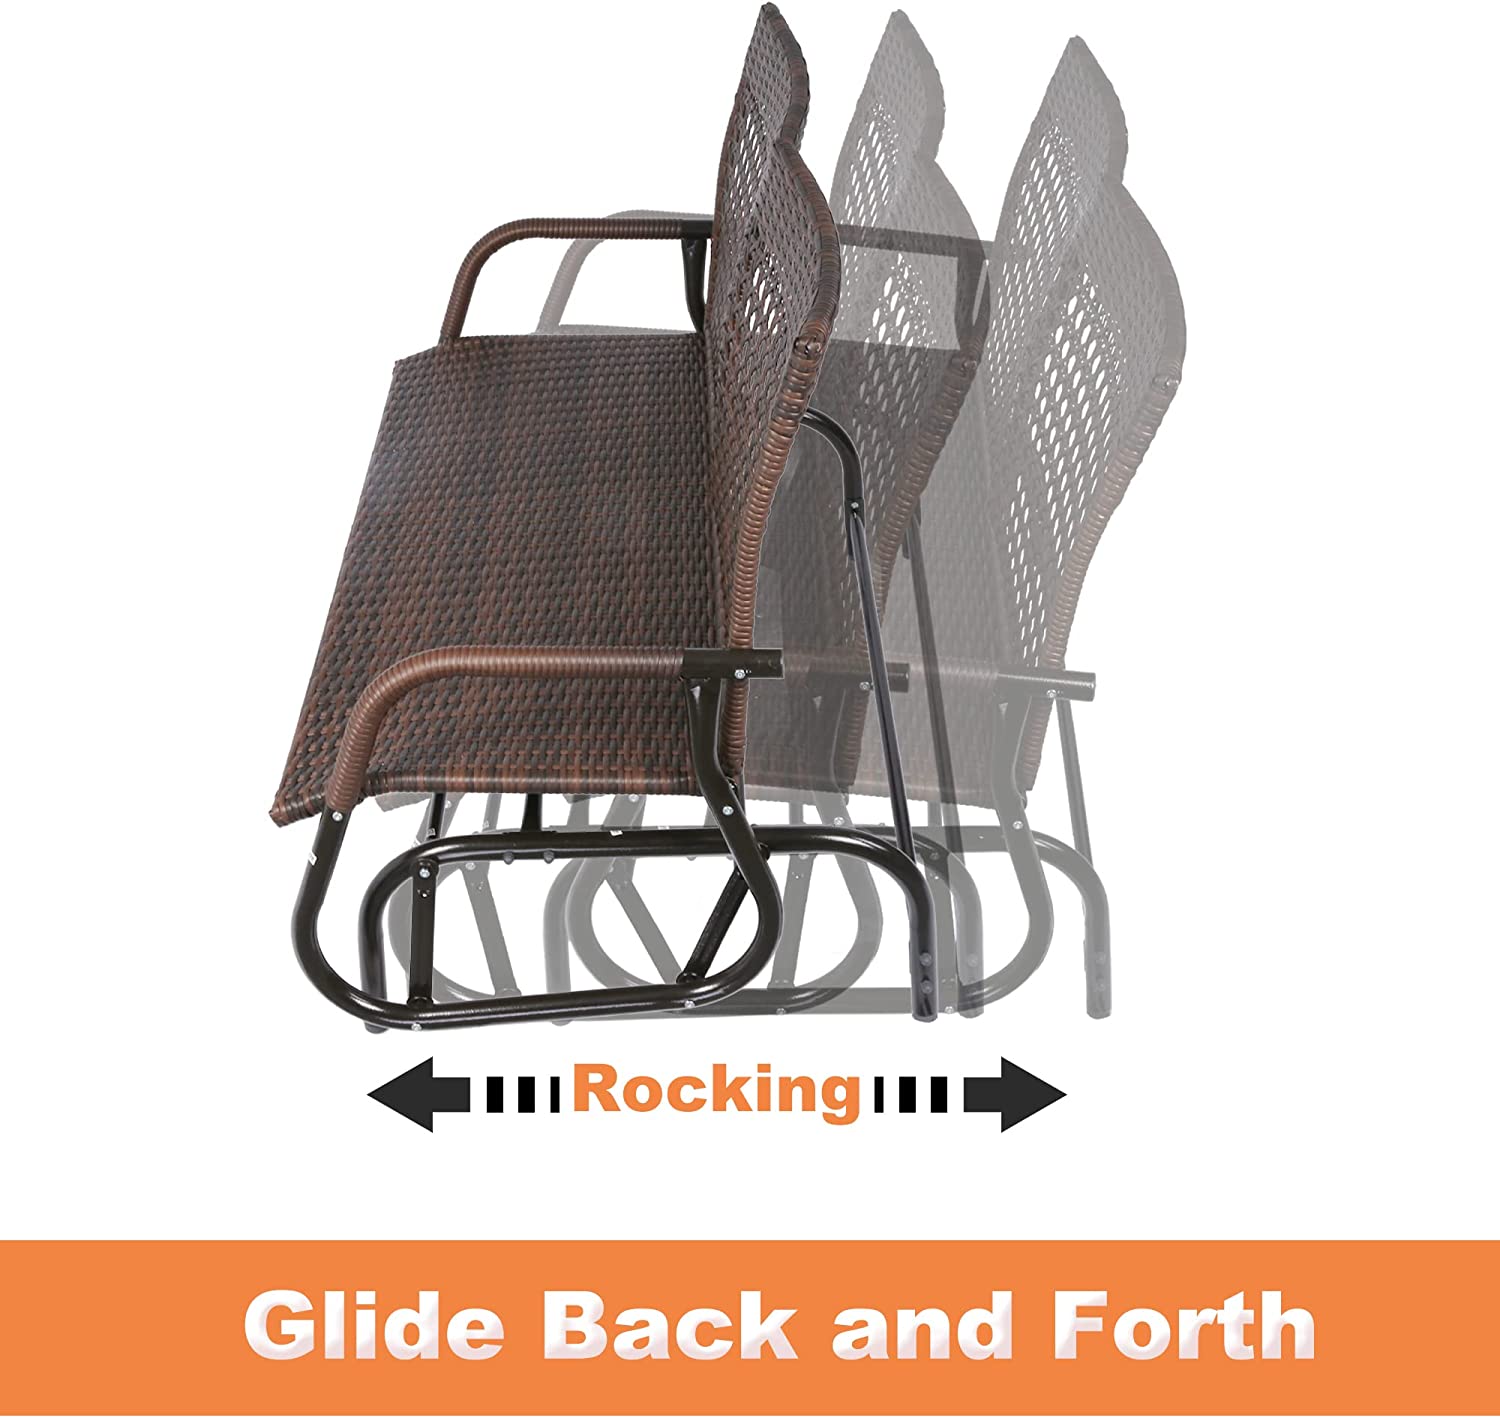 (Out of Stock) Swing Glider Chair, 48" Patio Swing Loveseat Chair w/ Extra Wide Seat and Curved Backrest